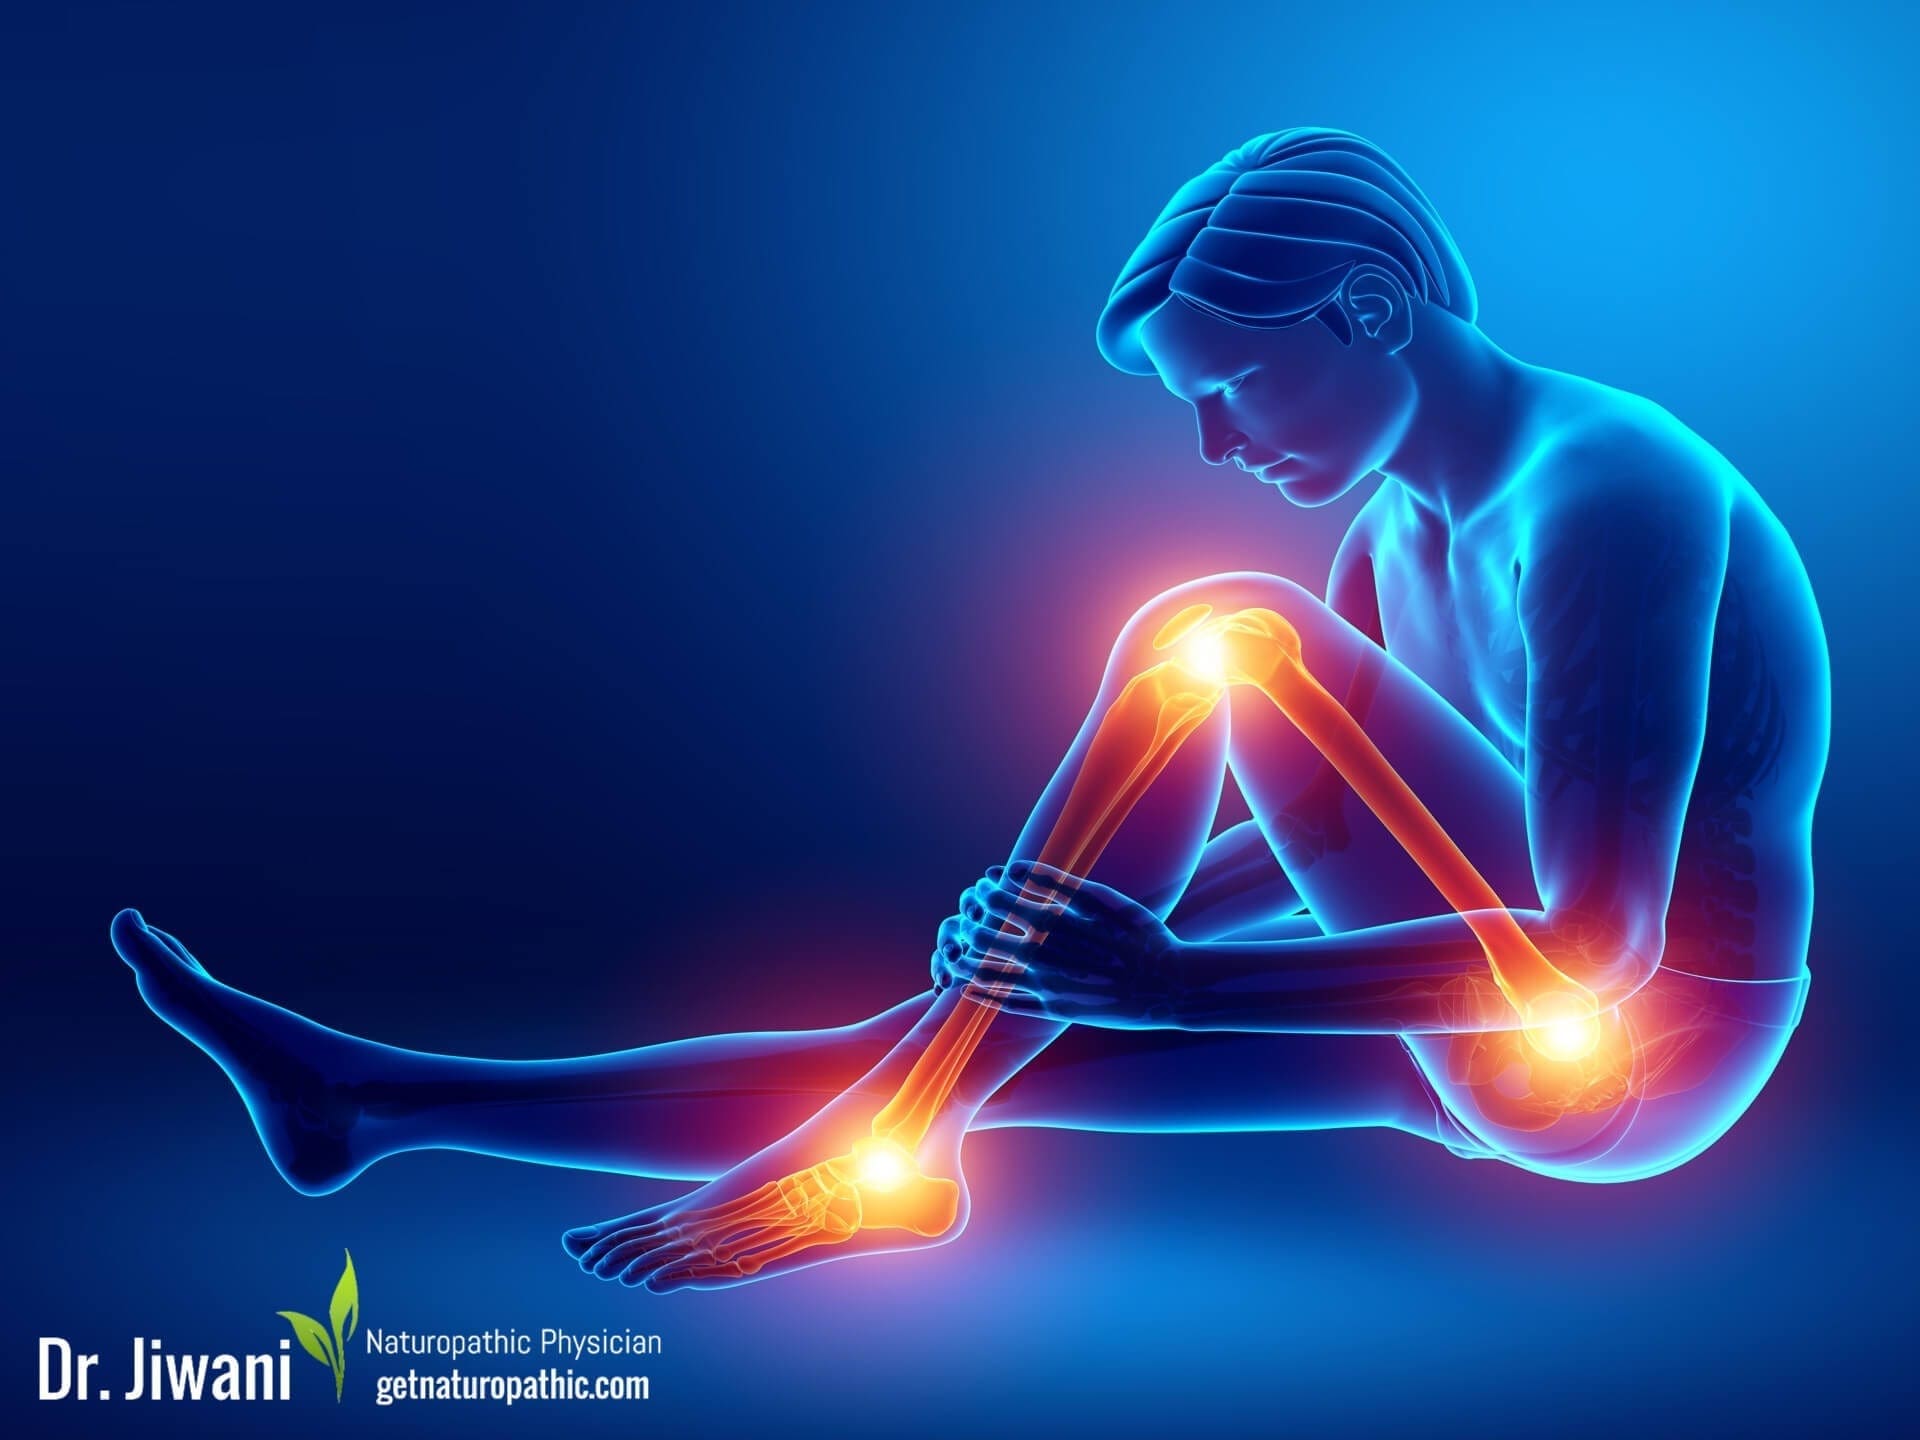 Prolozone Therapy: Natural Treatment for Joint Pain & Dysfunction | Dr. Jiwani's Naturopathic Nuggets Blog